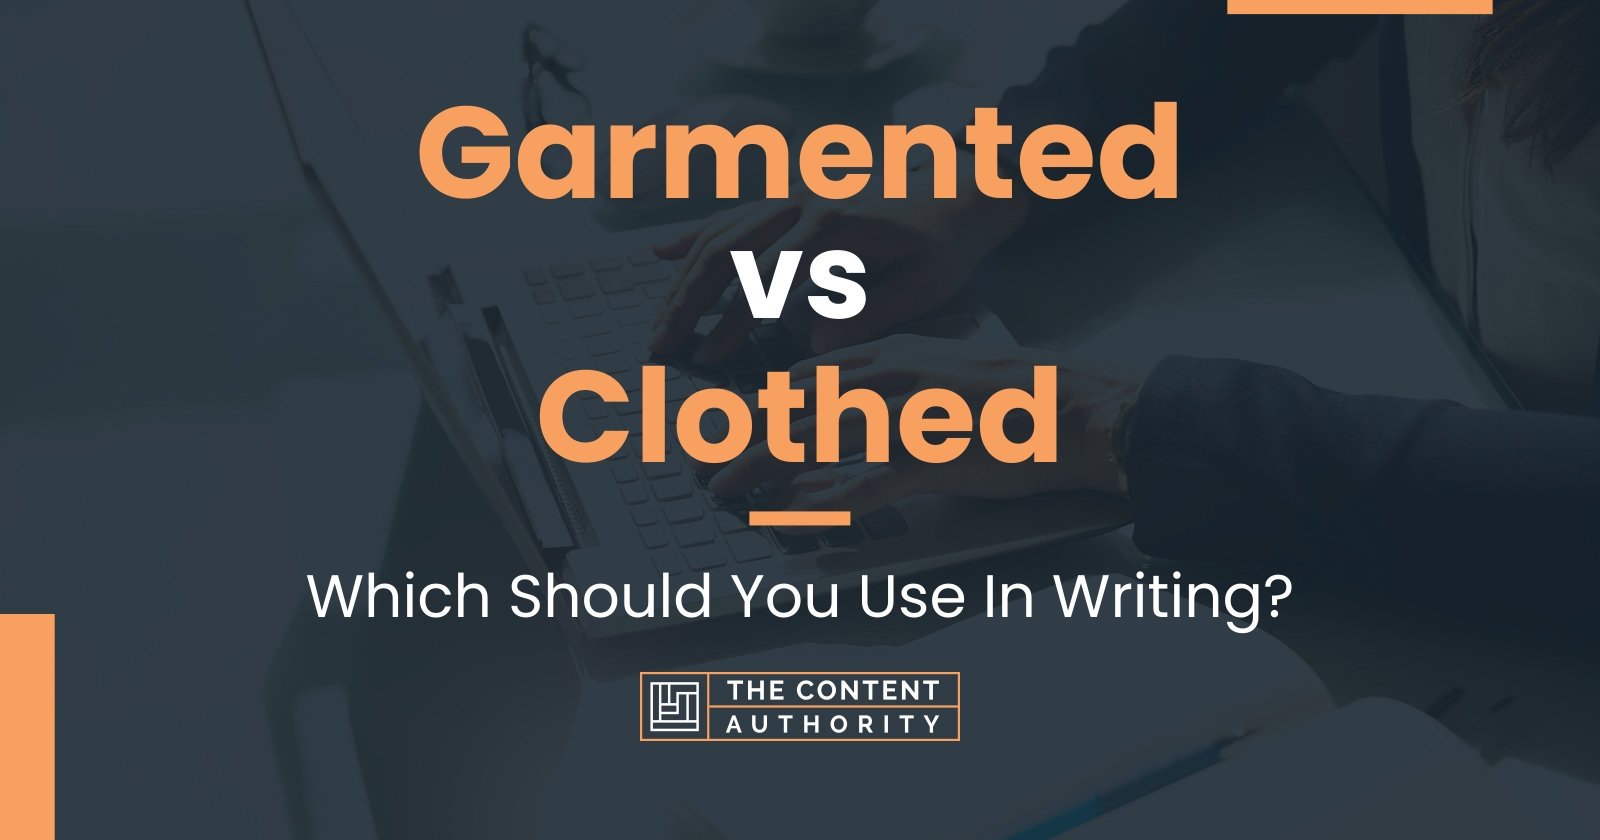 Garmented vs Clothed: Which Should You Use In Writing?